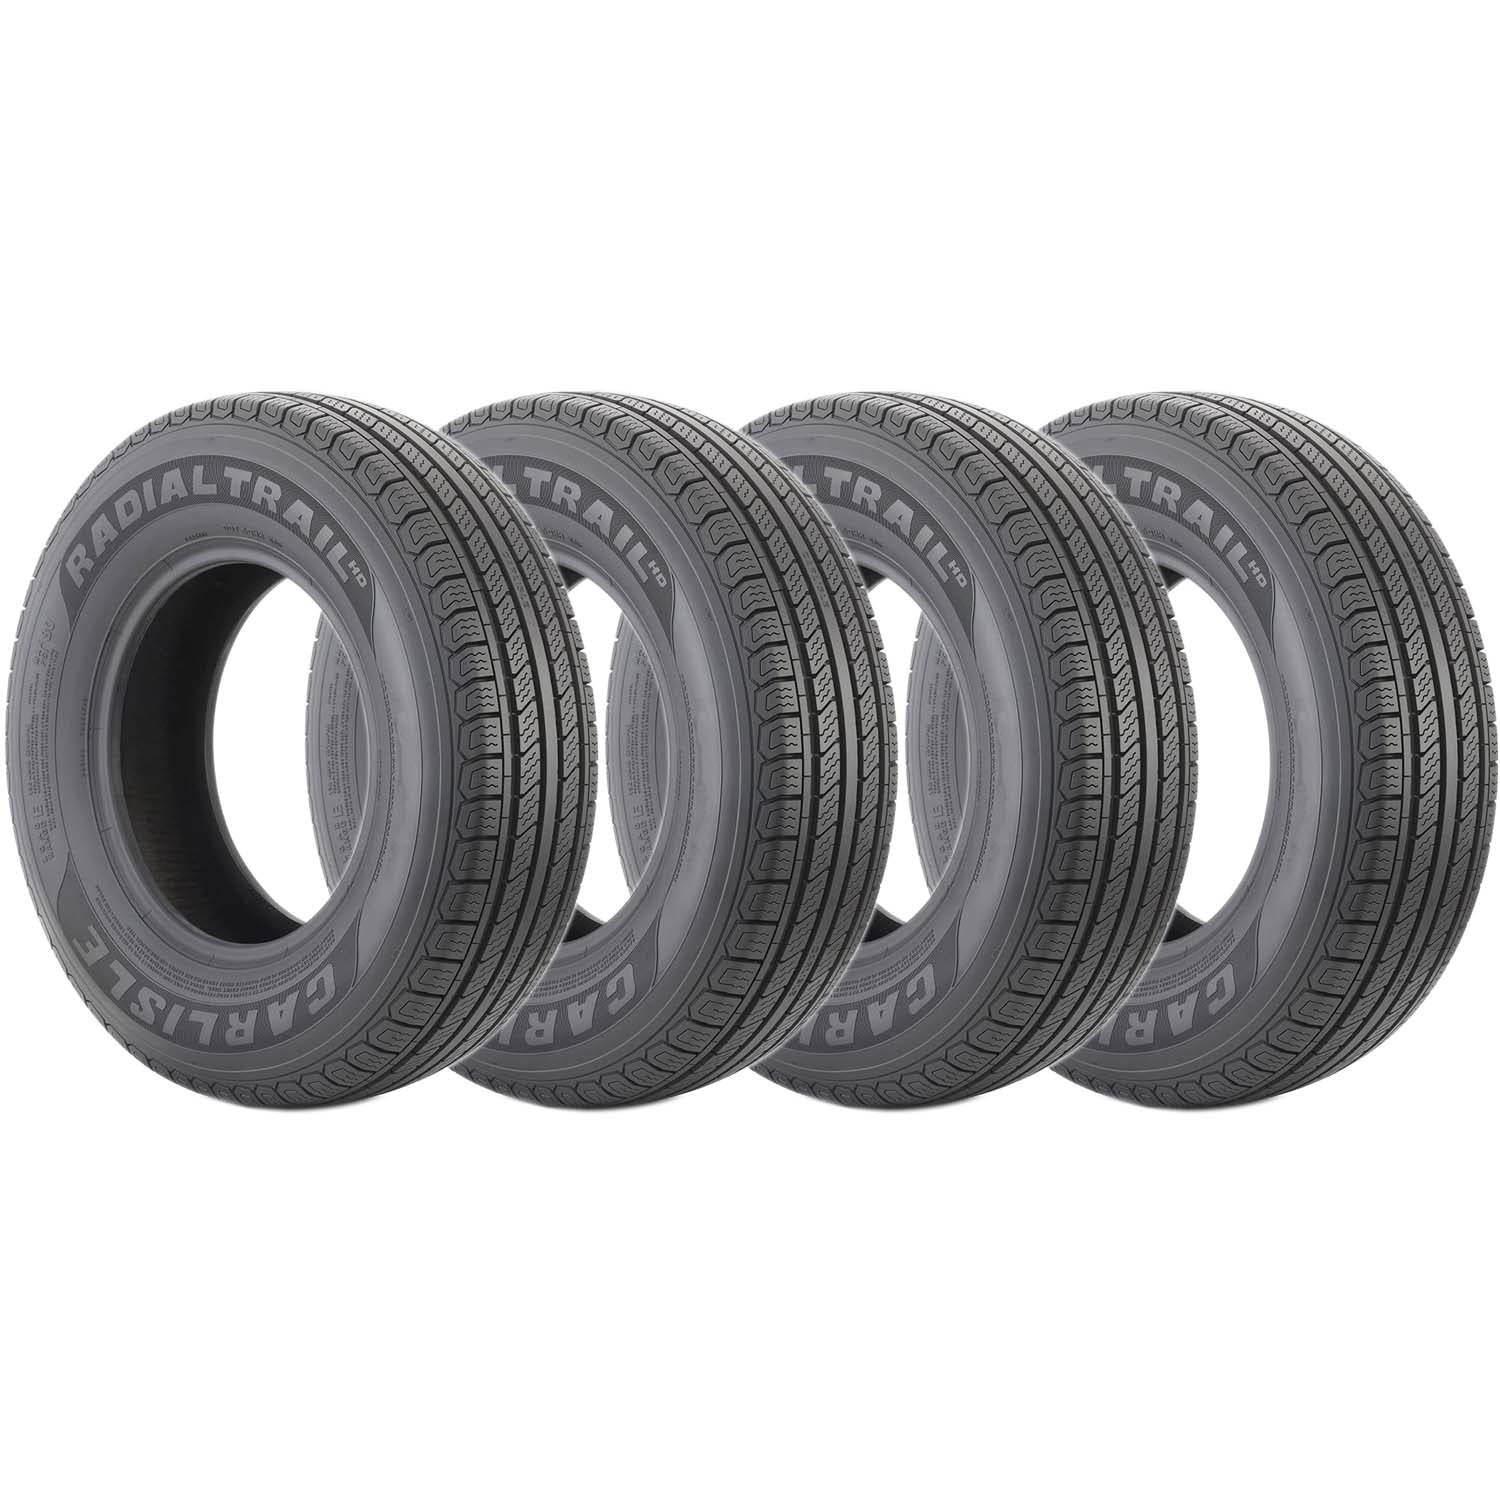 Carlisle Radial Trail HD Trailer Tire LRC 6ply ST175/80R13 Pack of 4